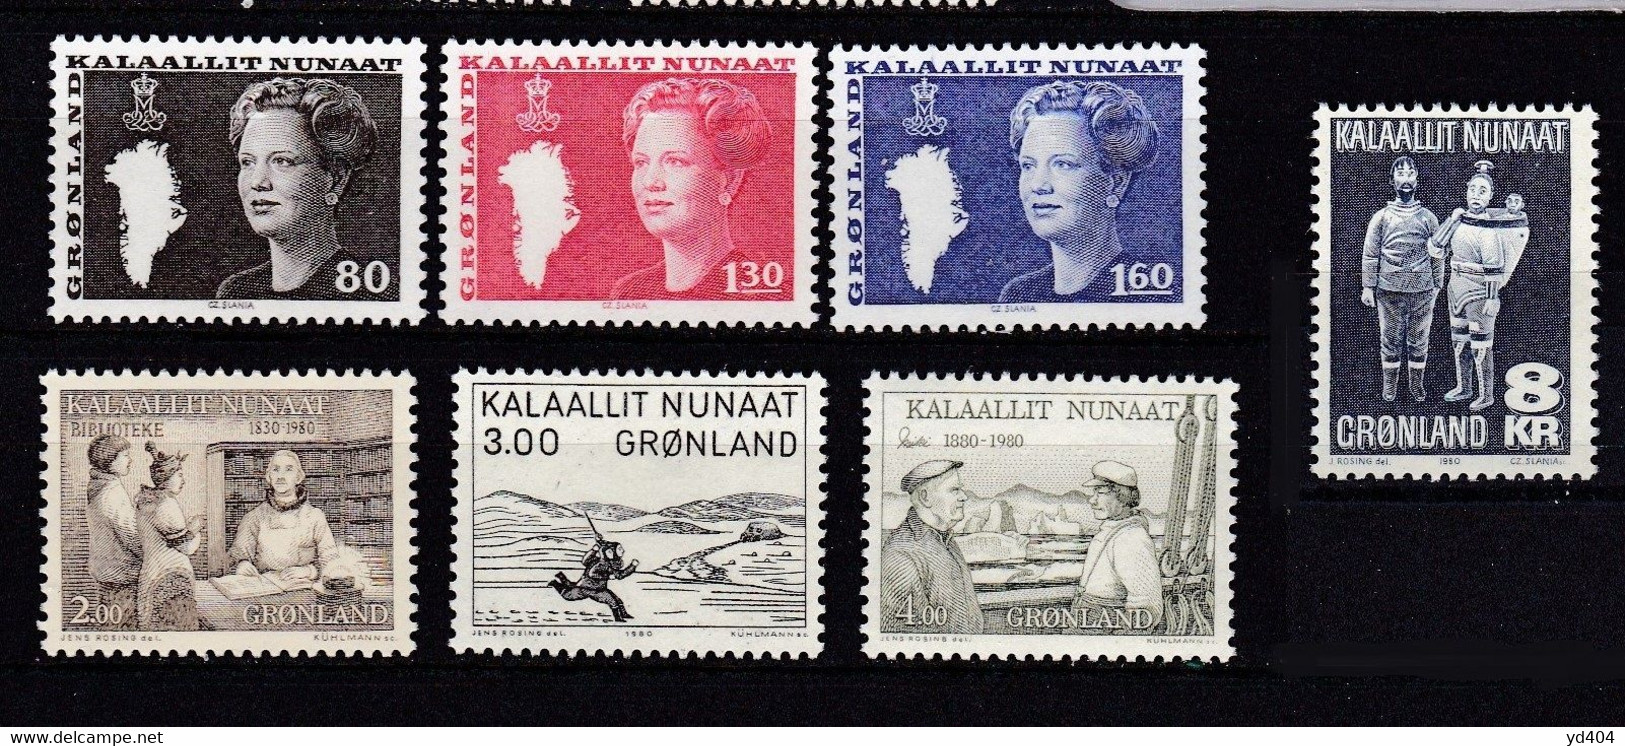 GL133 - GREENLAND – 1980 – FULL YEAR SET – Y&T # 107/13 MNH 9,85 € - Années Complètes